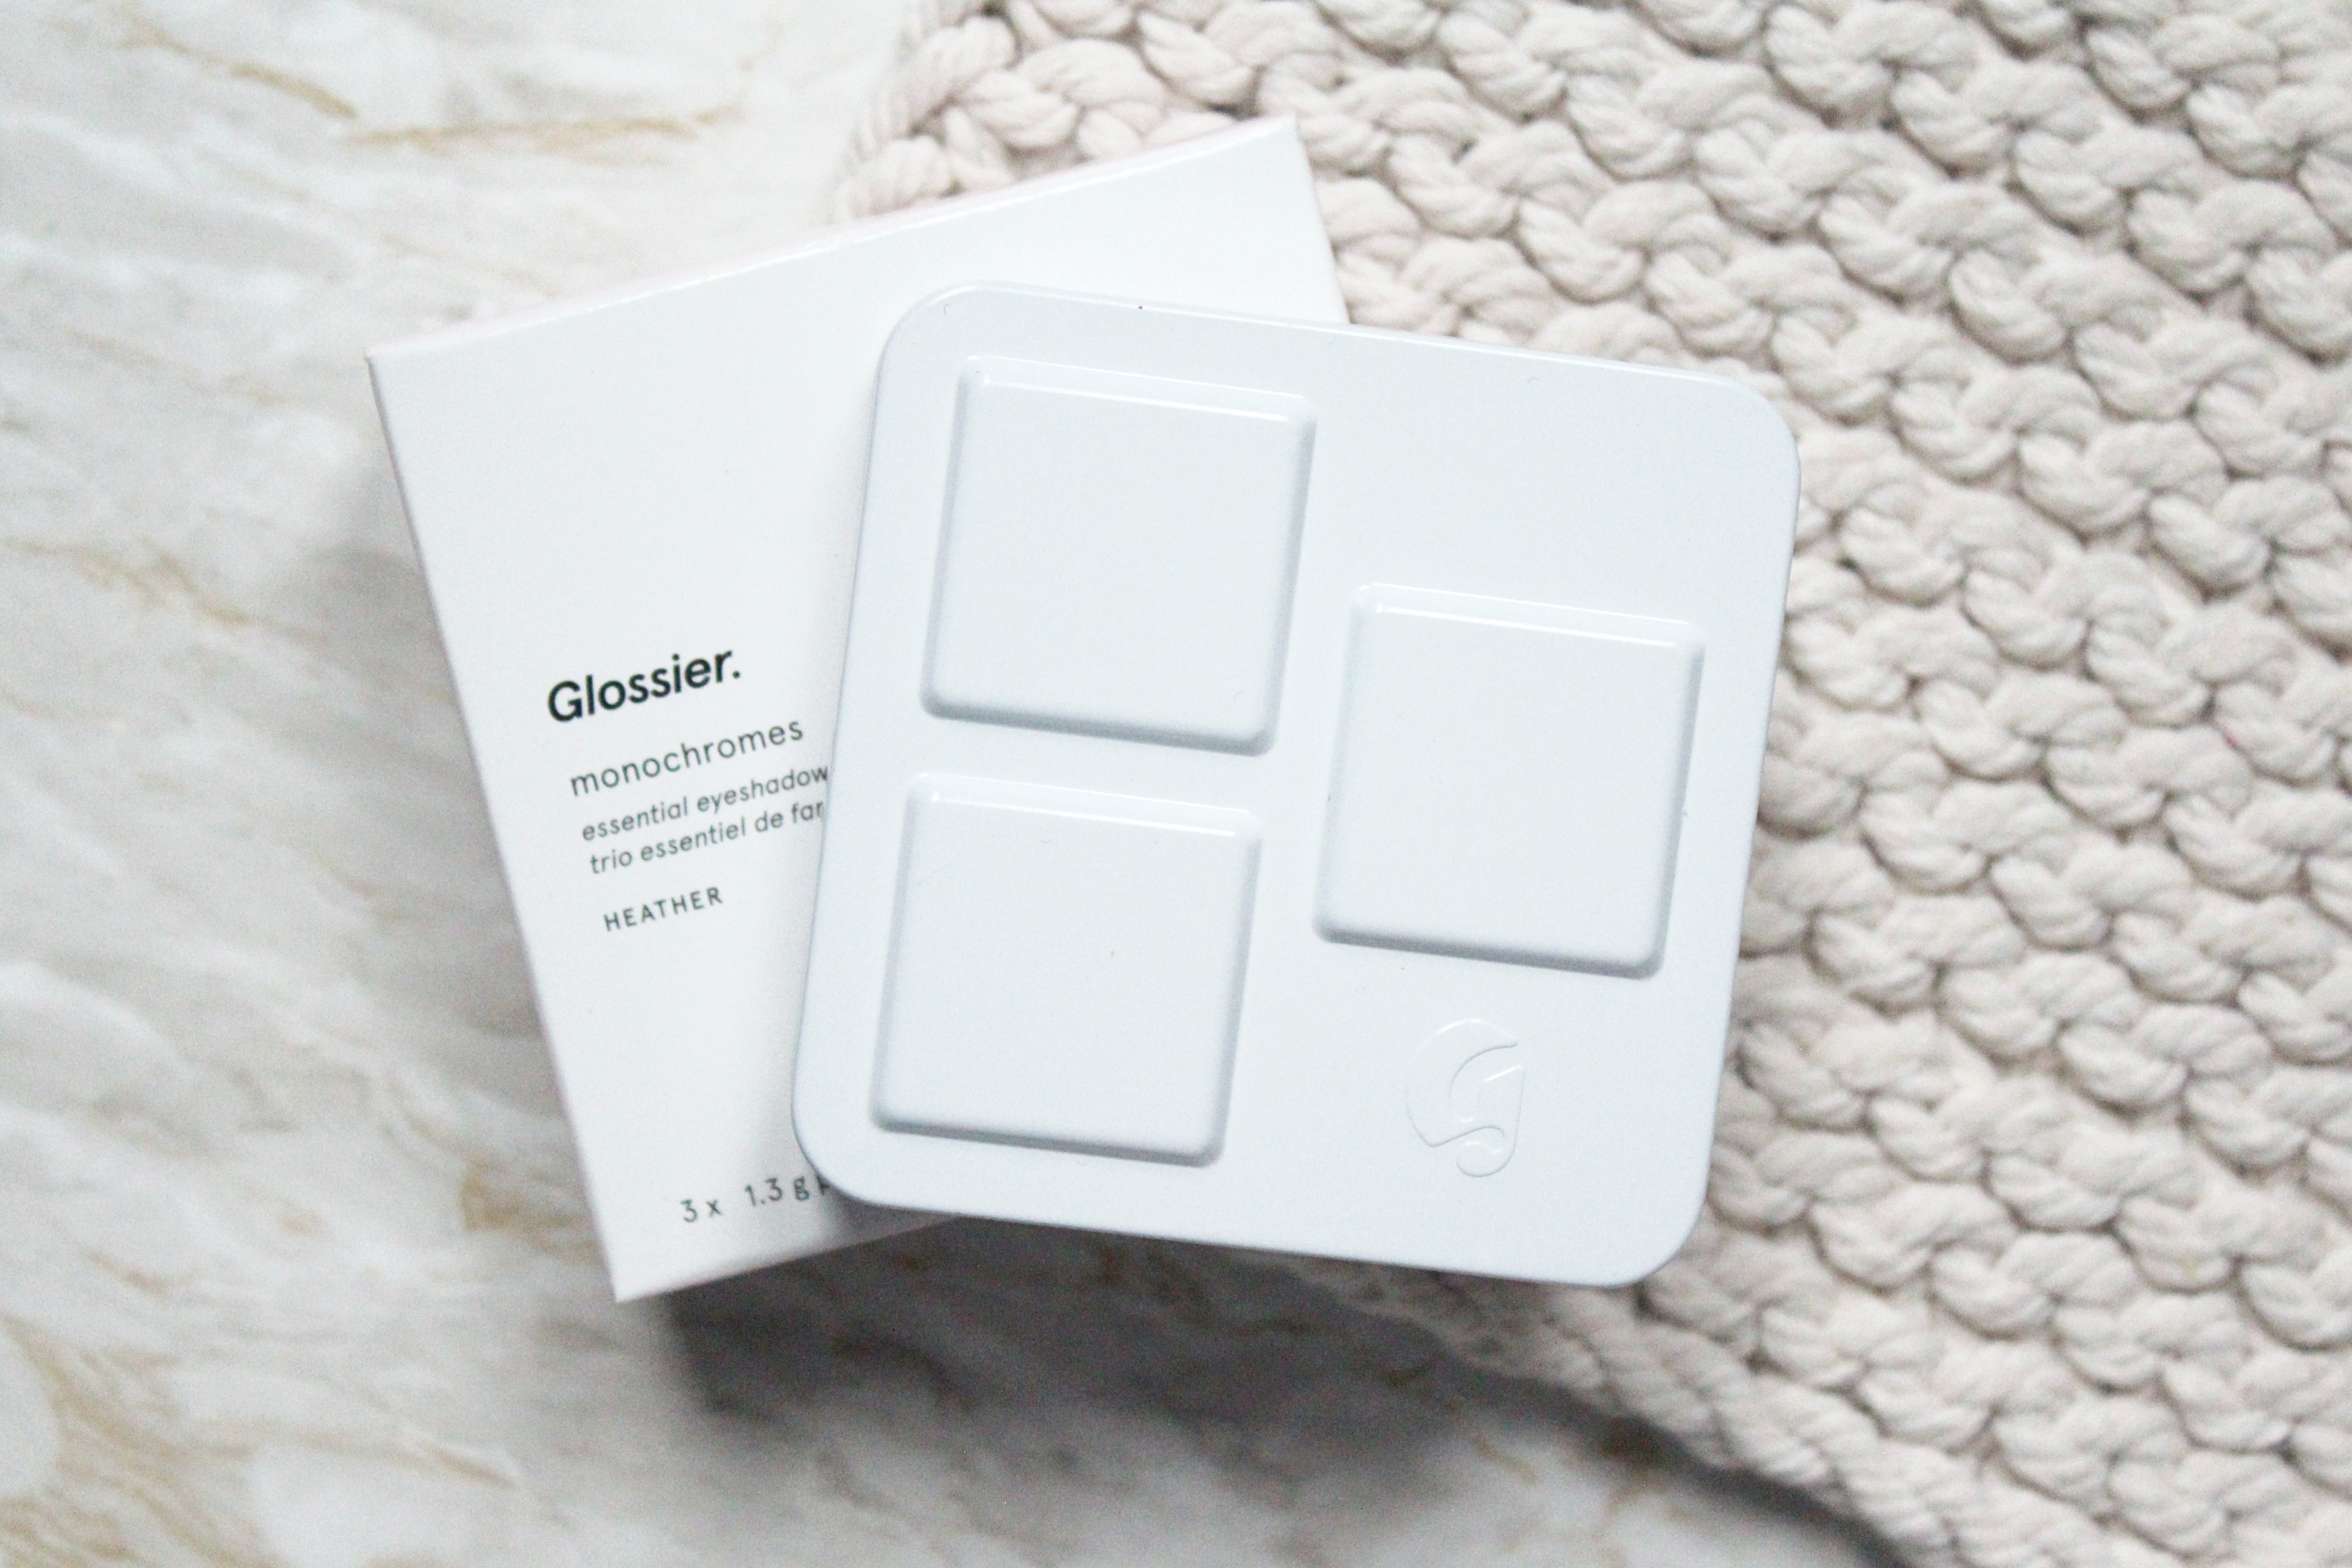 Glossier Monochrome in Heather Review & Swatches (+ Discount Code)